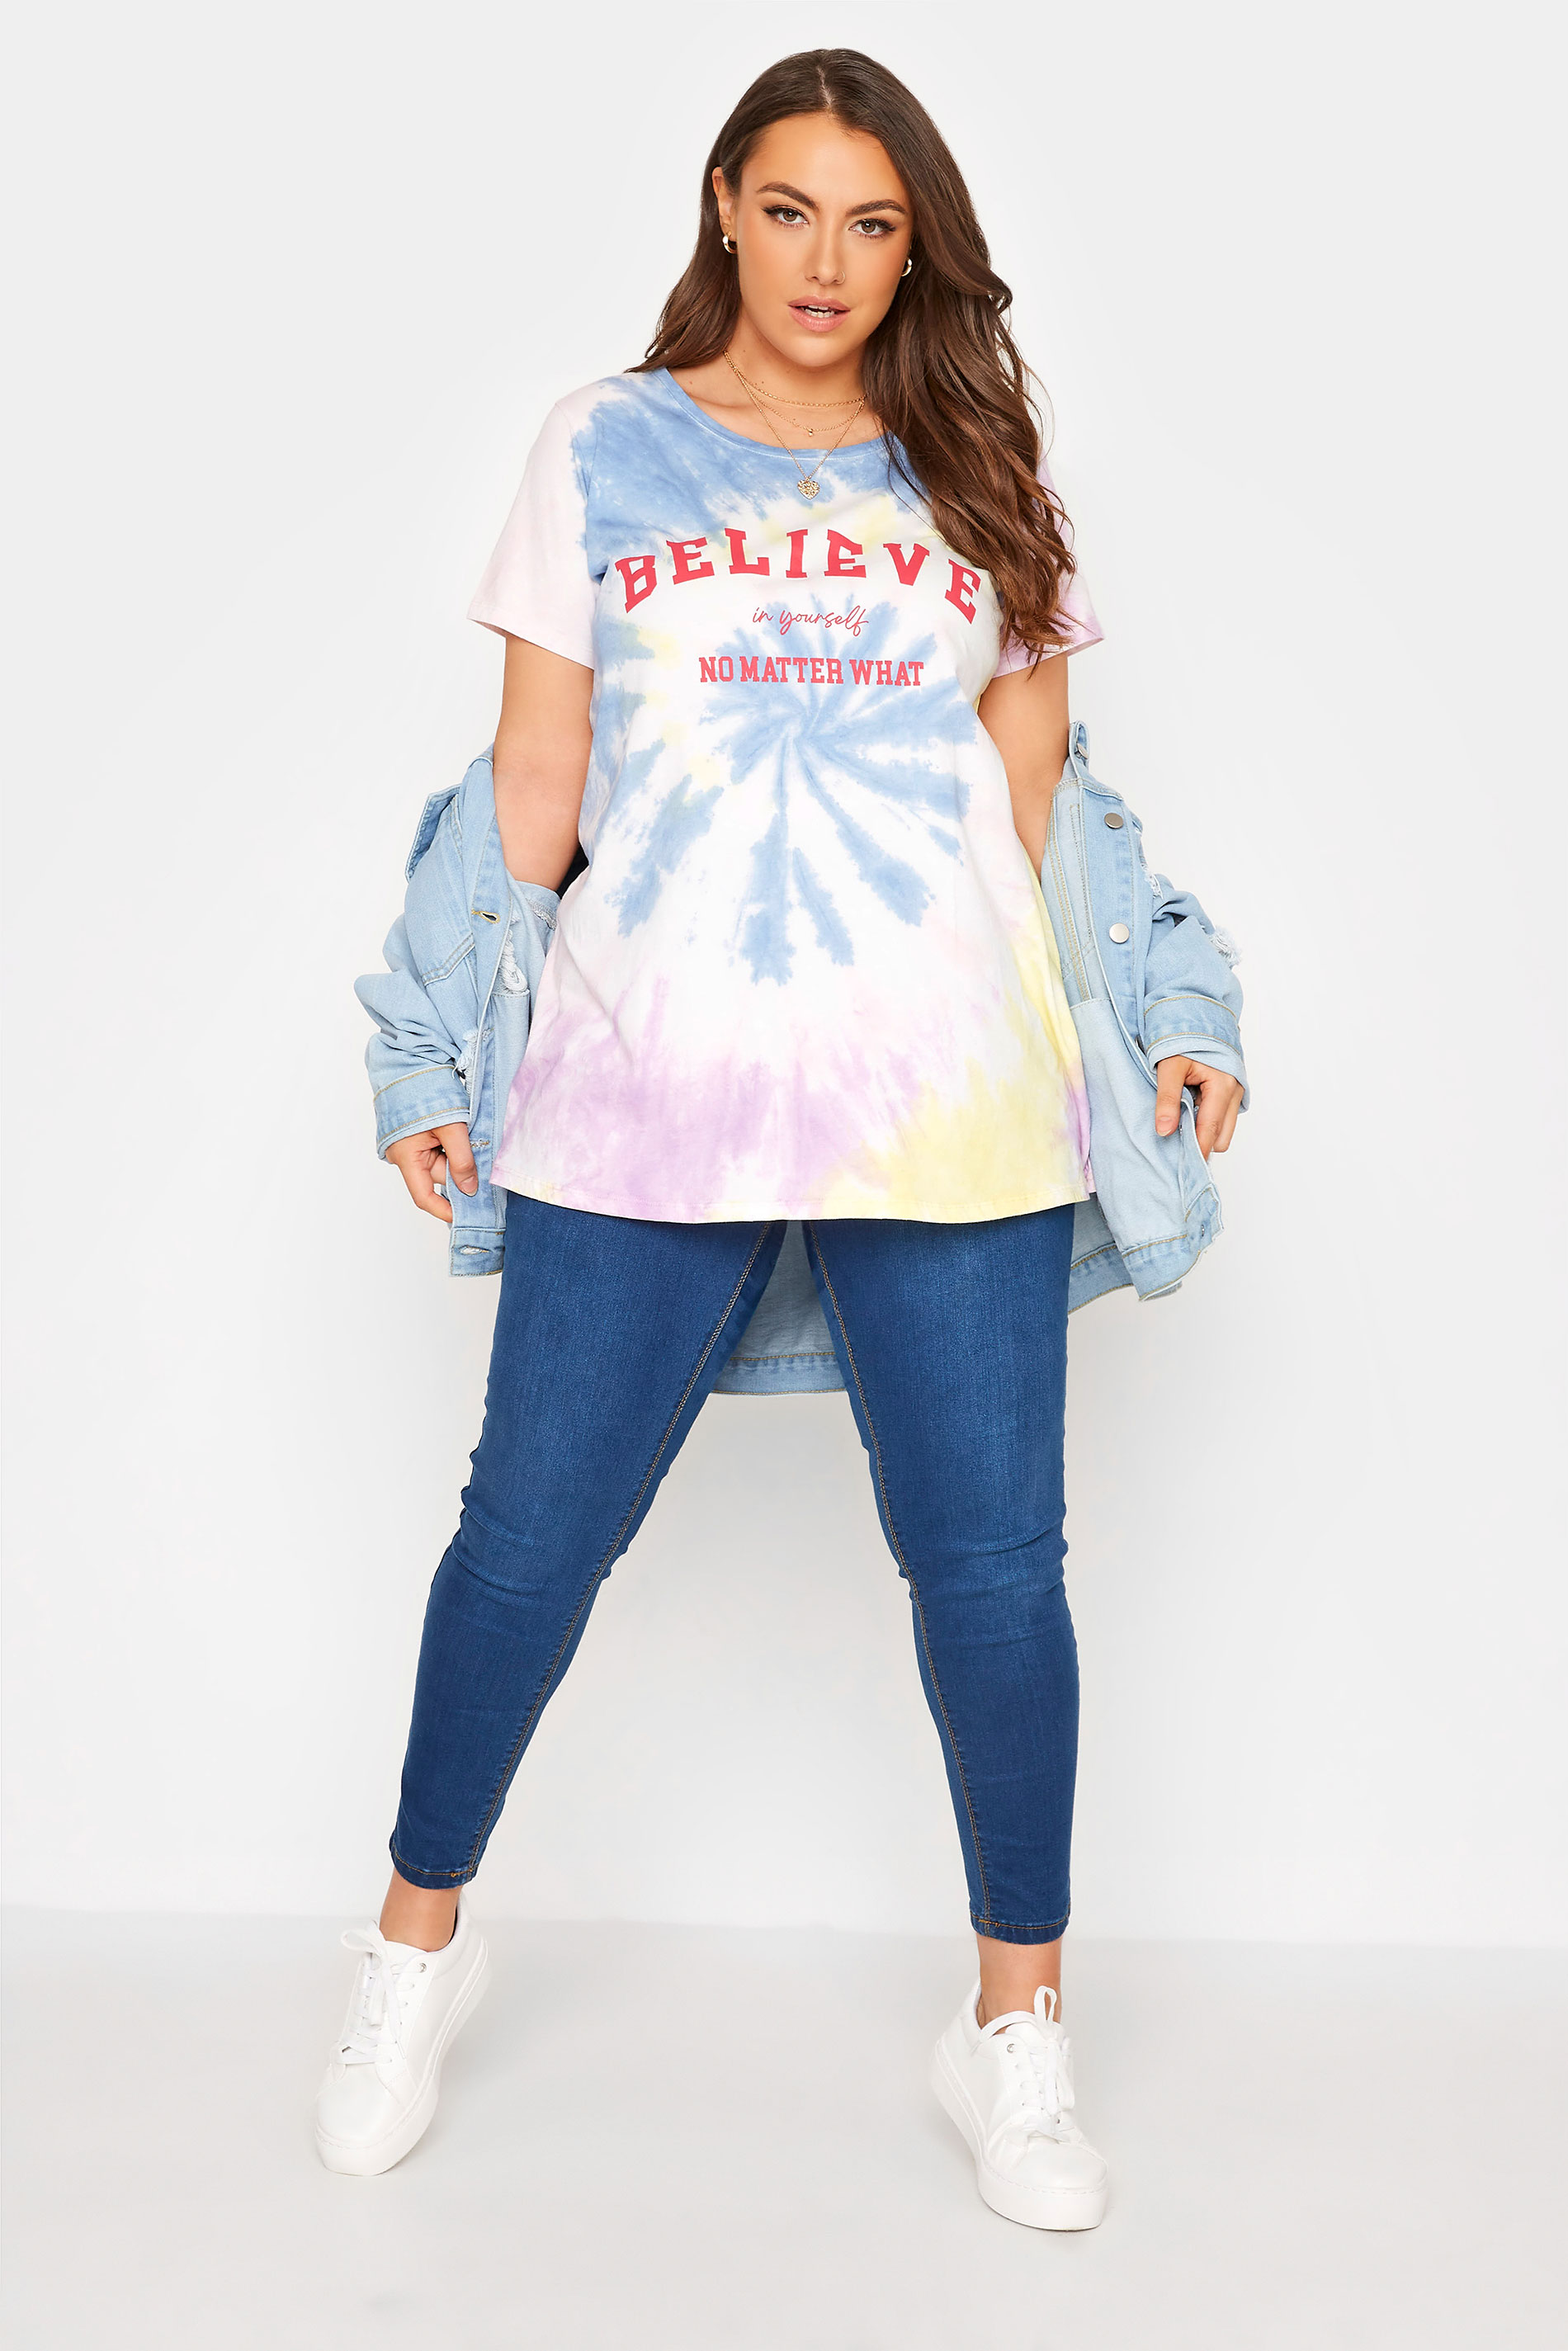 Grande taille  Tops Grande taille  Tops à Slogans | T-Shirt Blanc Tie & Dye 'Believe in Yourself' - HO00017